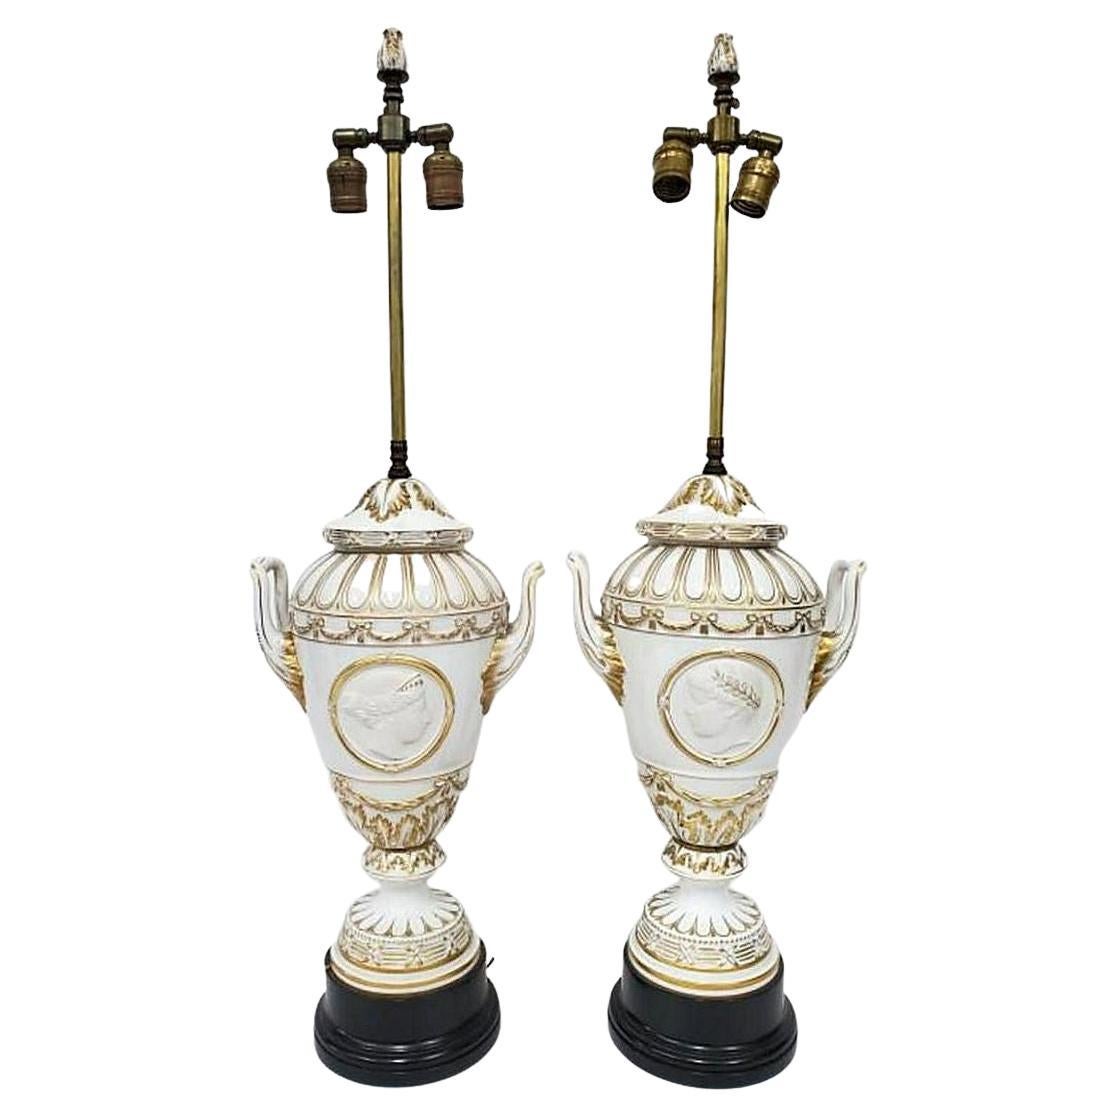 Pair Antique Neoclassical White Glazed Porcelain Table Lamps